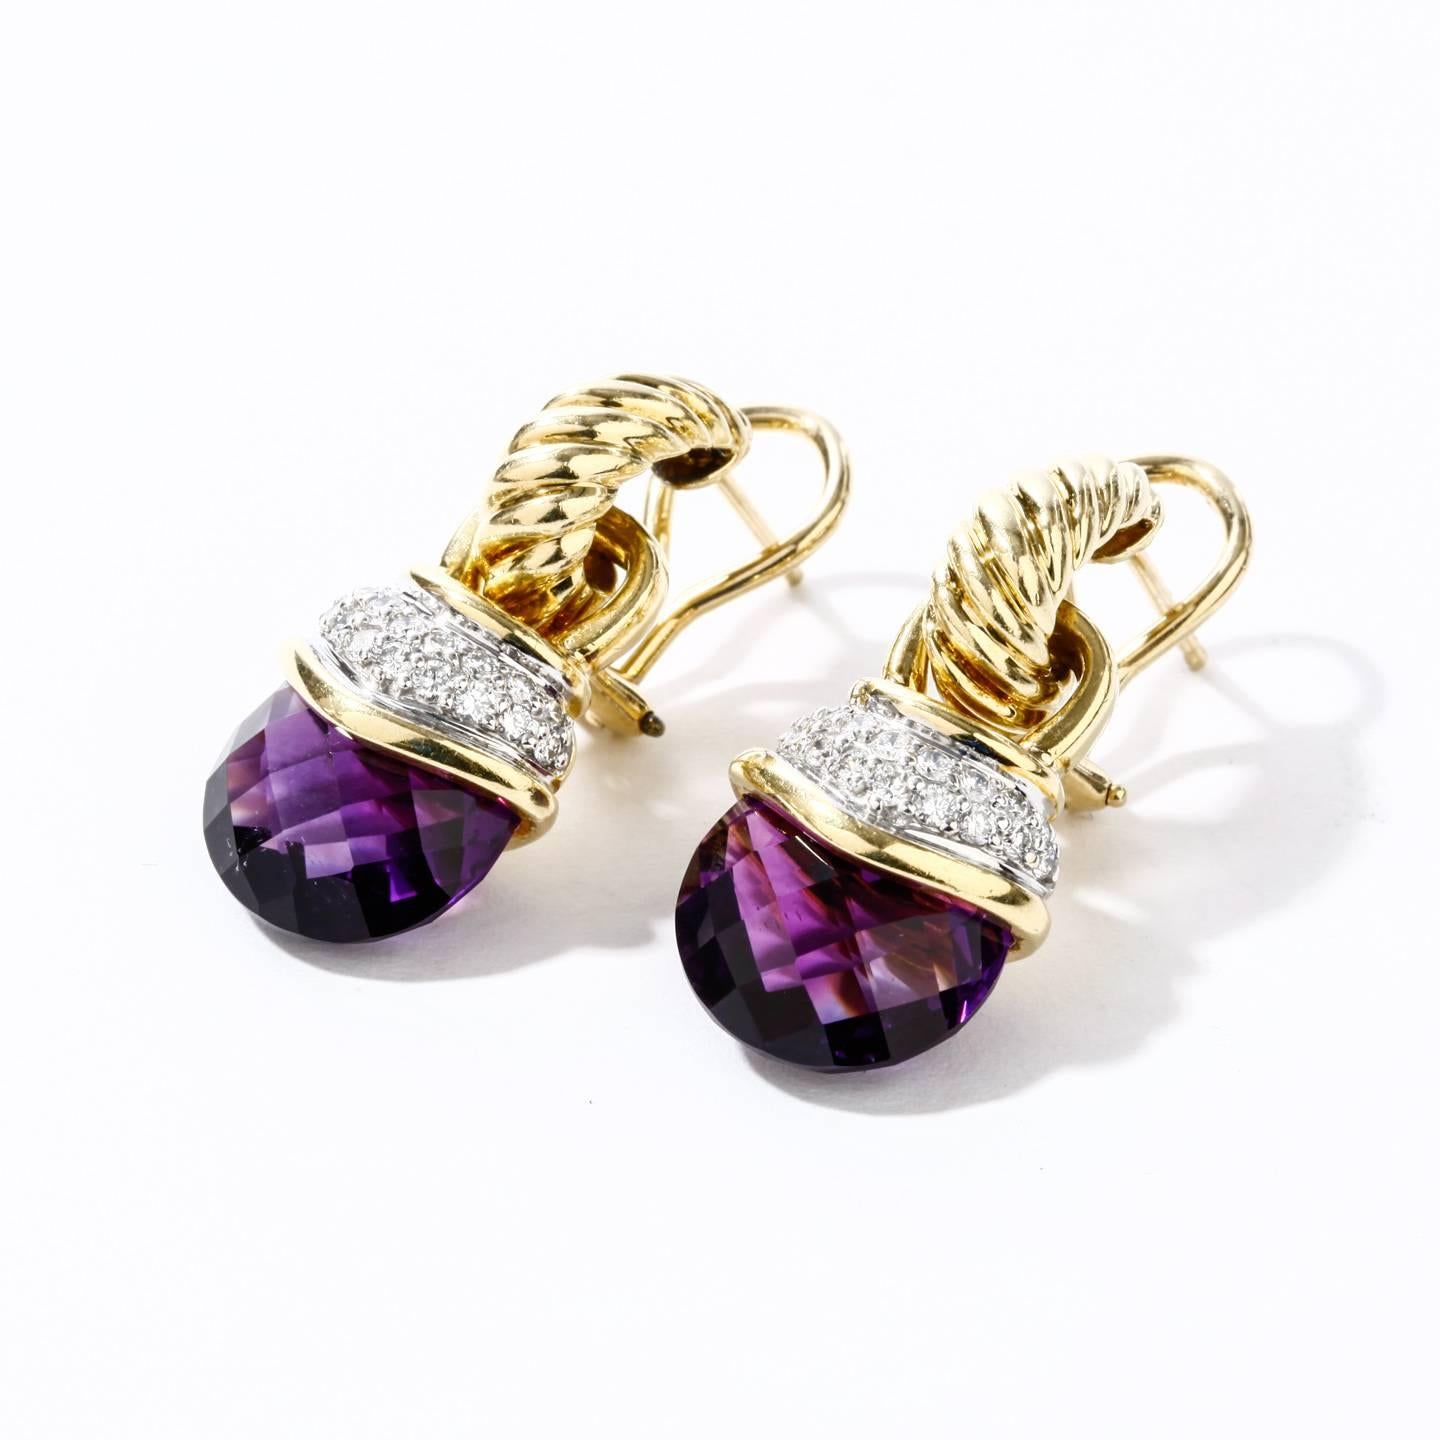 These 18k yellow gold and sterling silver David Yurman drop earrings are set with amethysts and diamonds. They are convertible. When the amethyst and diamond drop portions are removed, you are left with two pendants and gold cable huggies (small